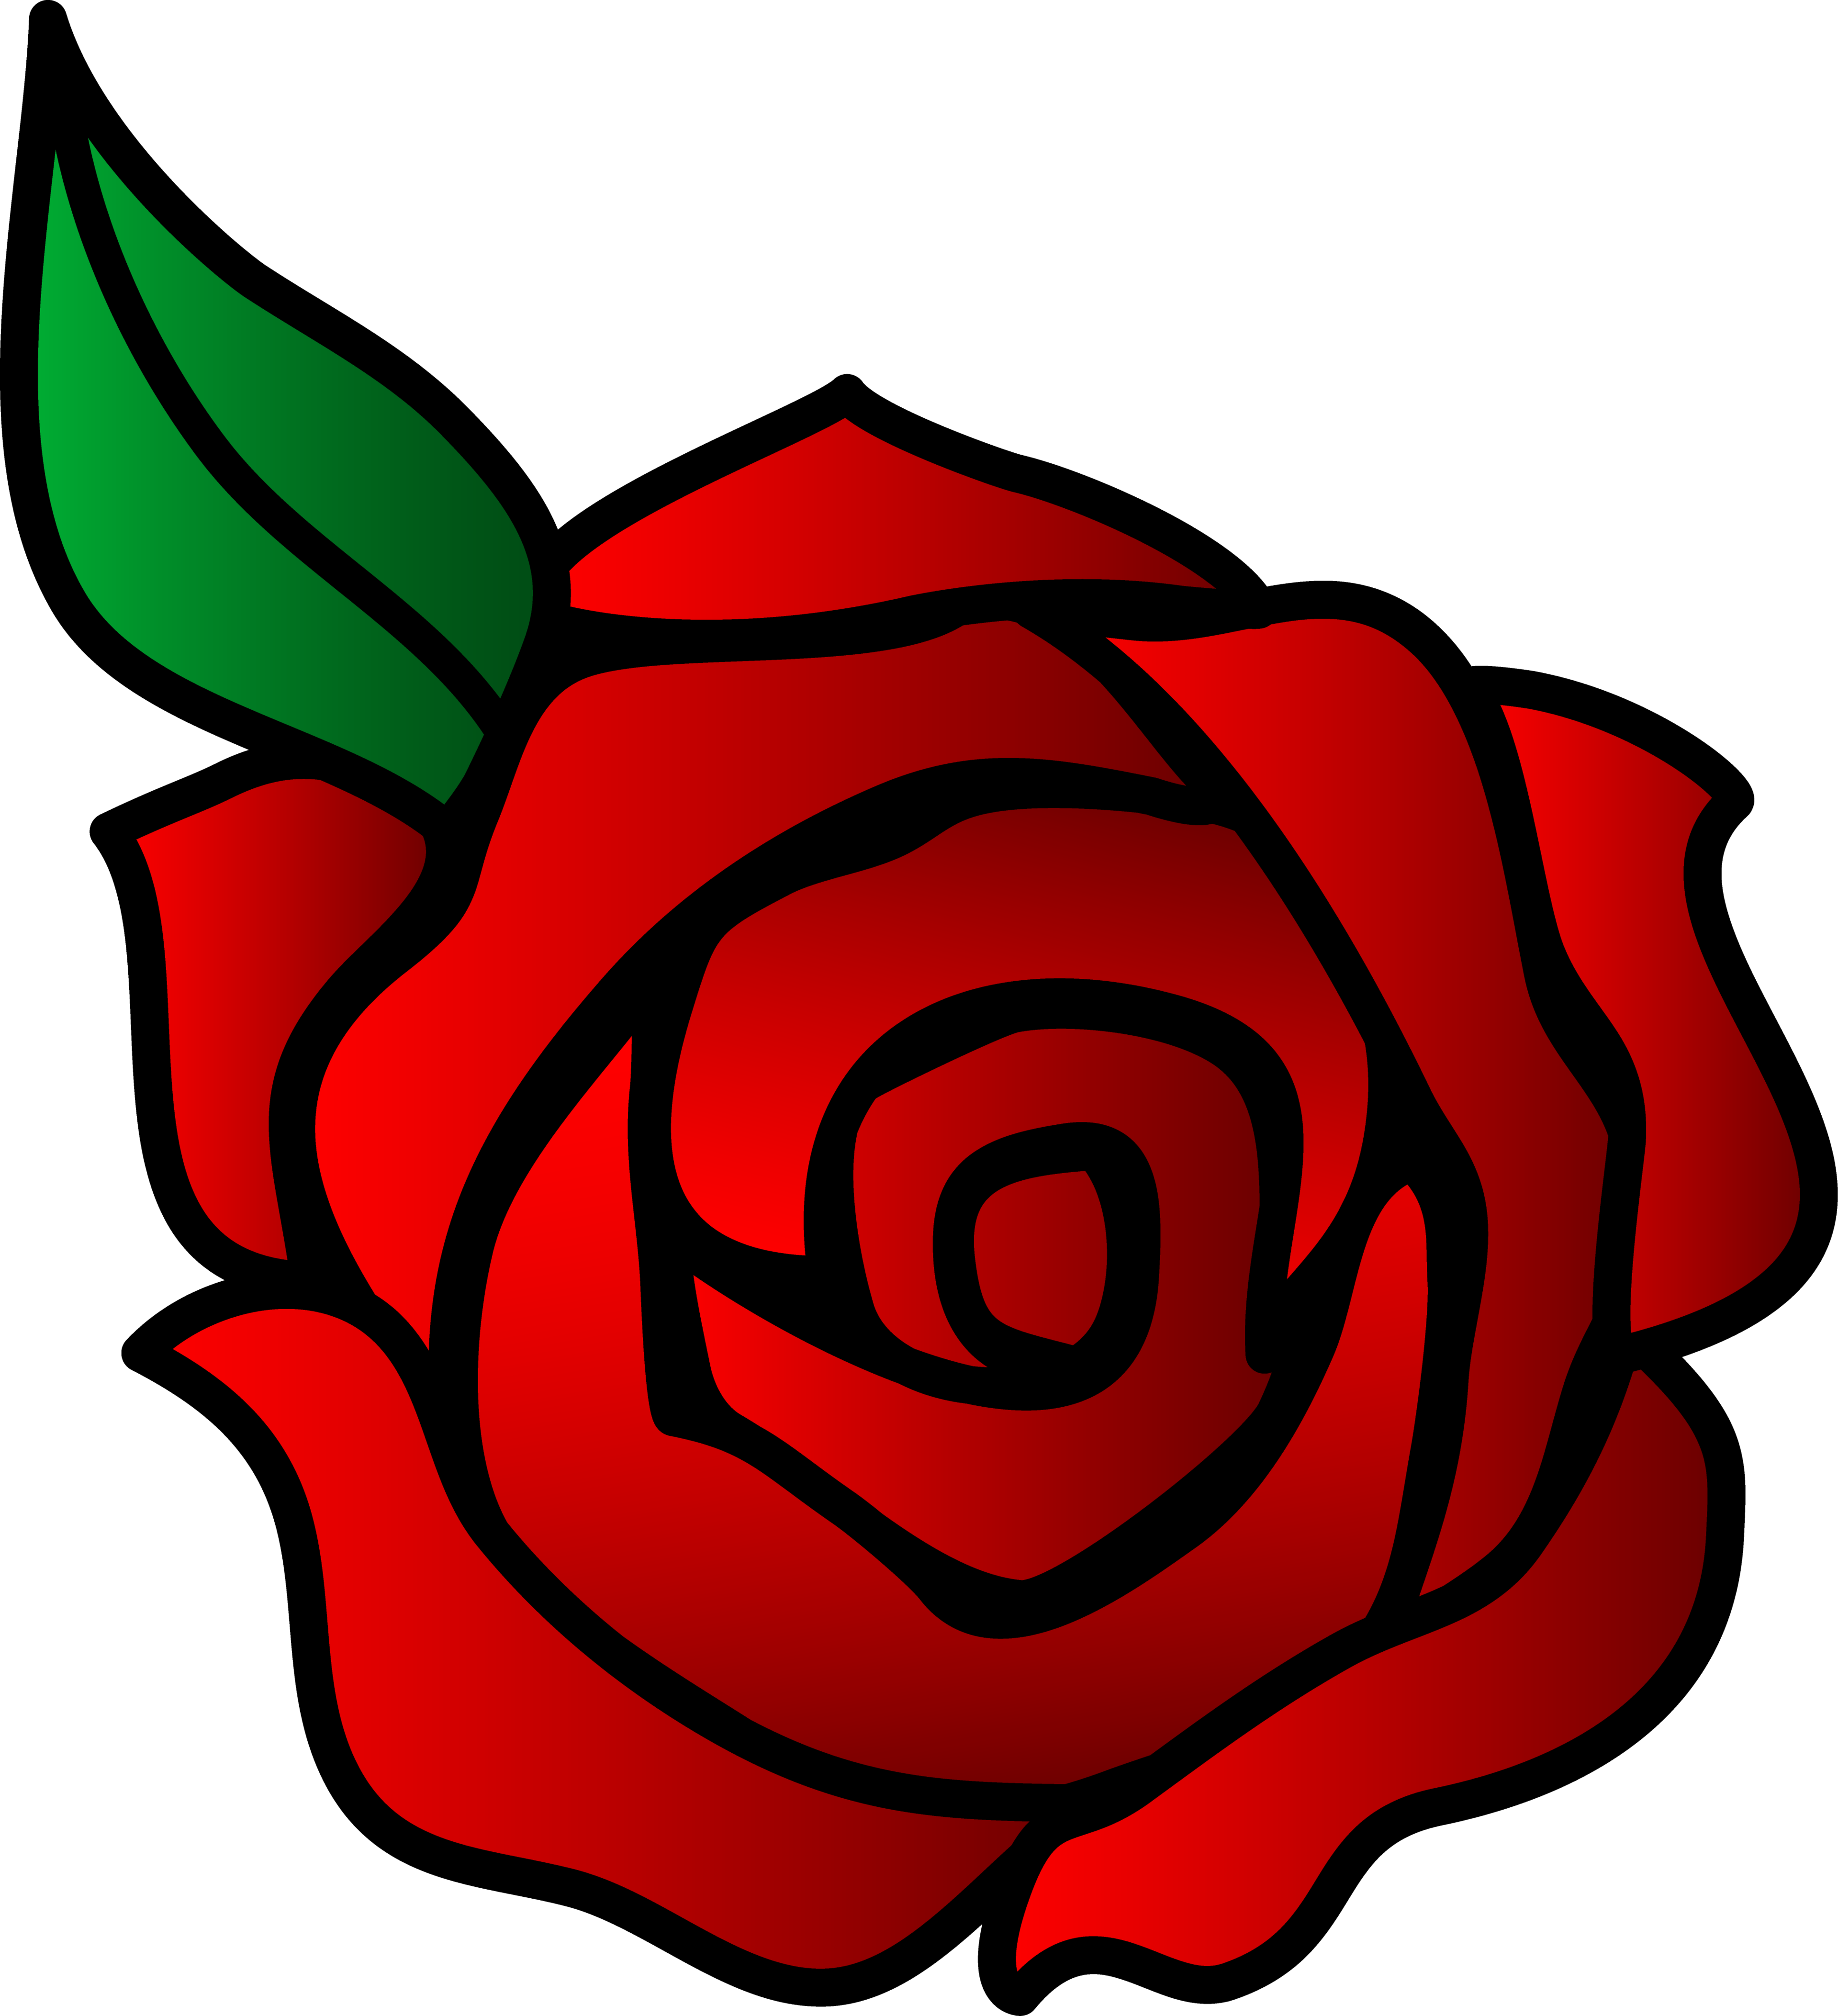 Red Rose Outline Clipart - Free to use Clip Art Resource